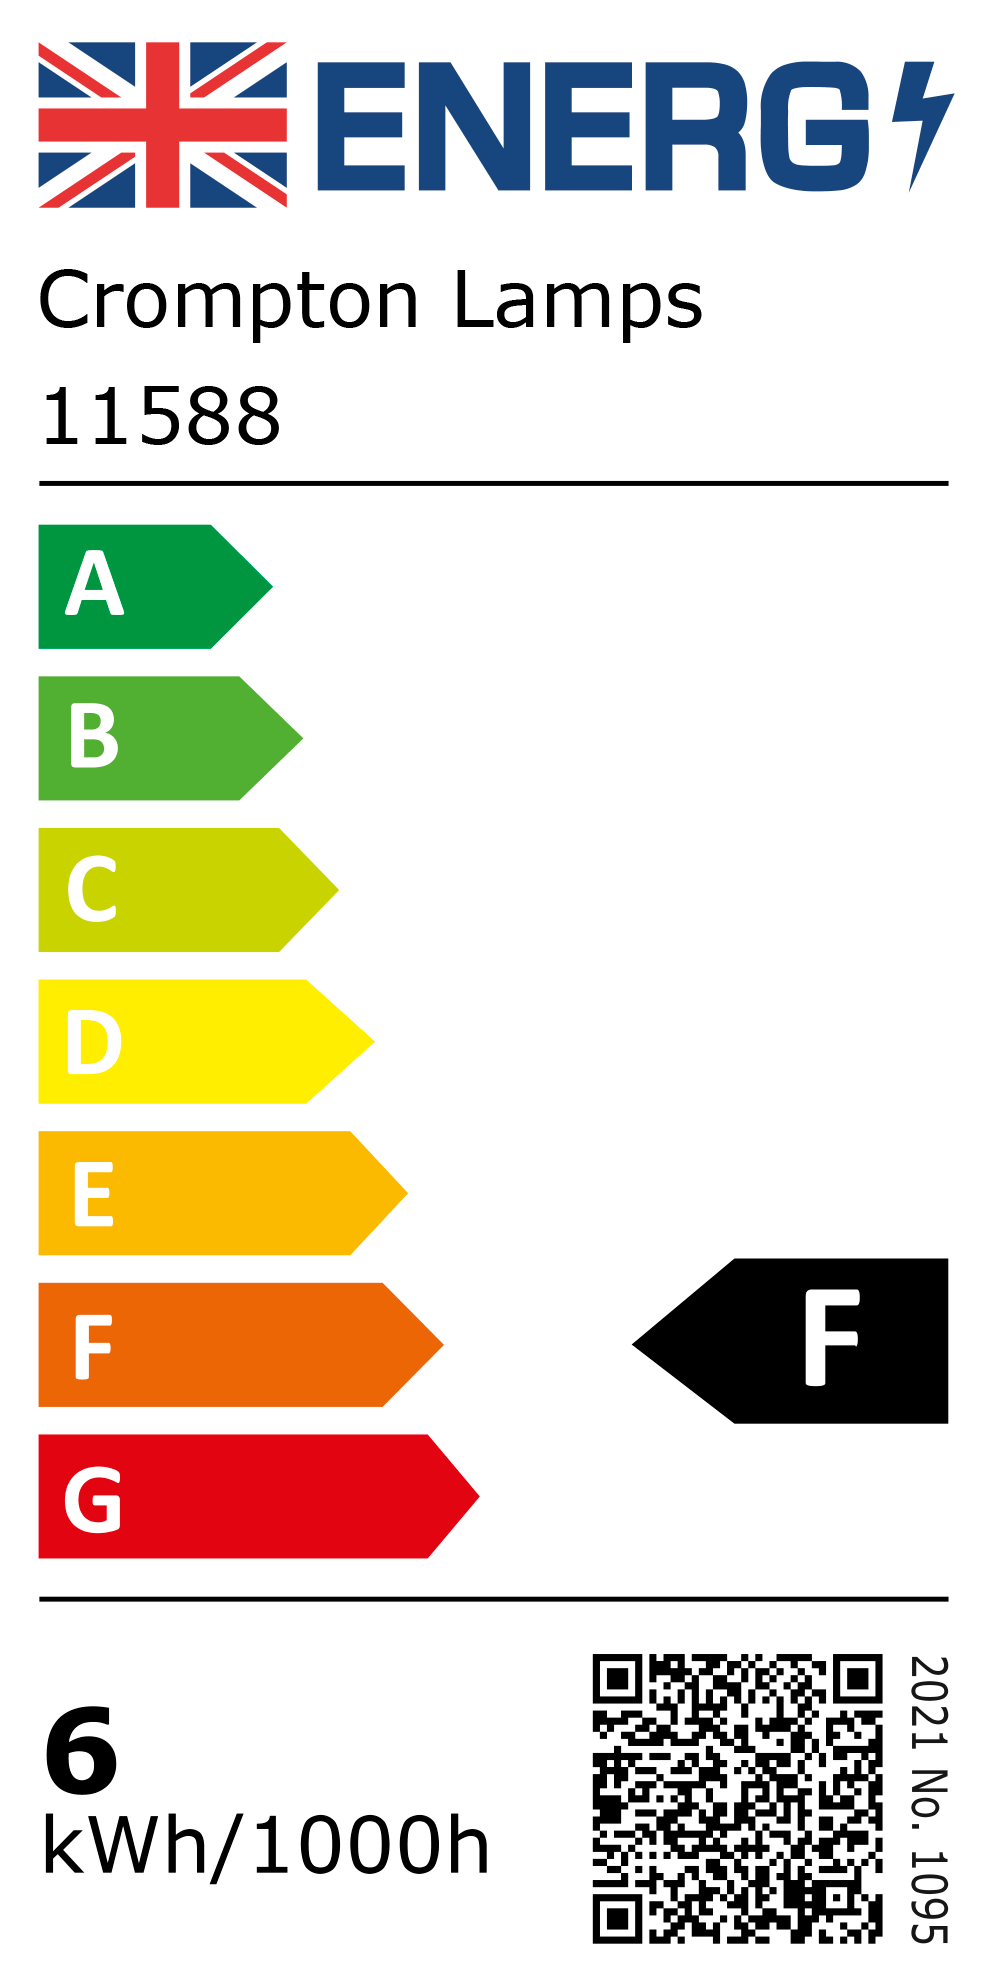 New 2021 Energy Rating Label: Stock Code 11588